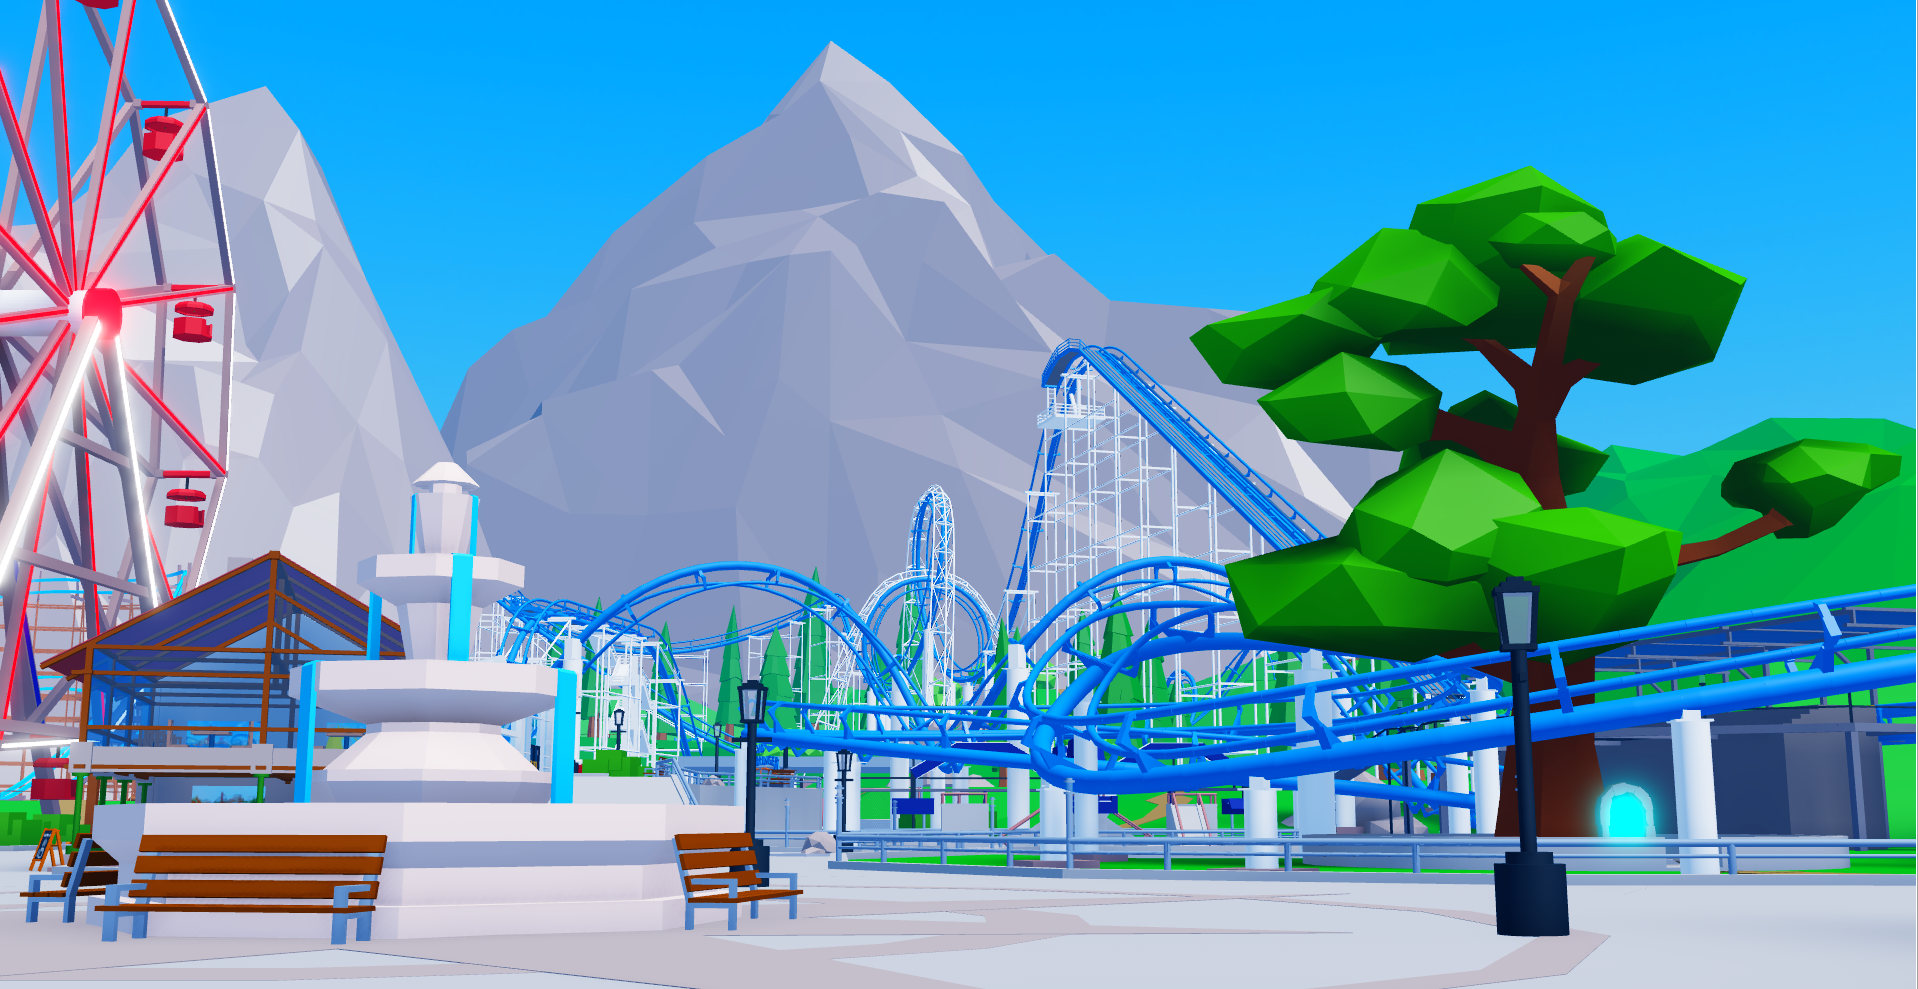 Park square with blue looping roller coaster and mountainous background.